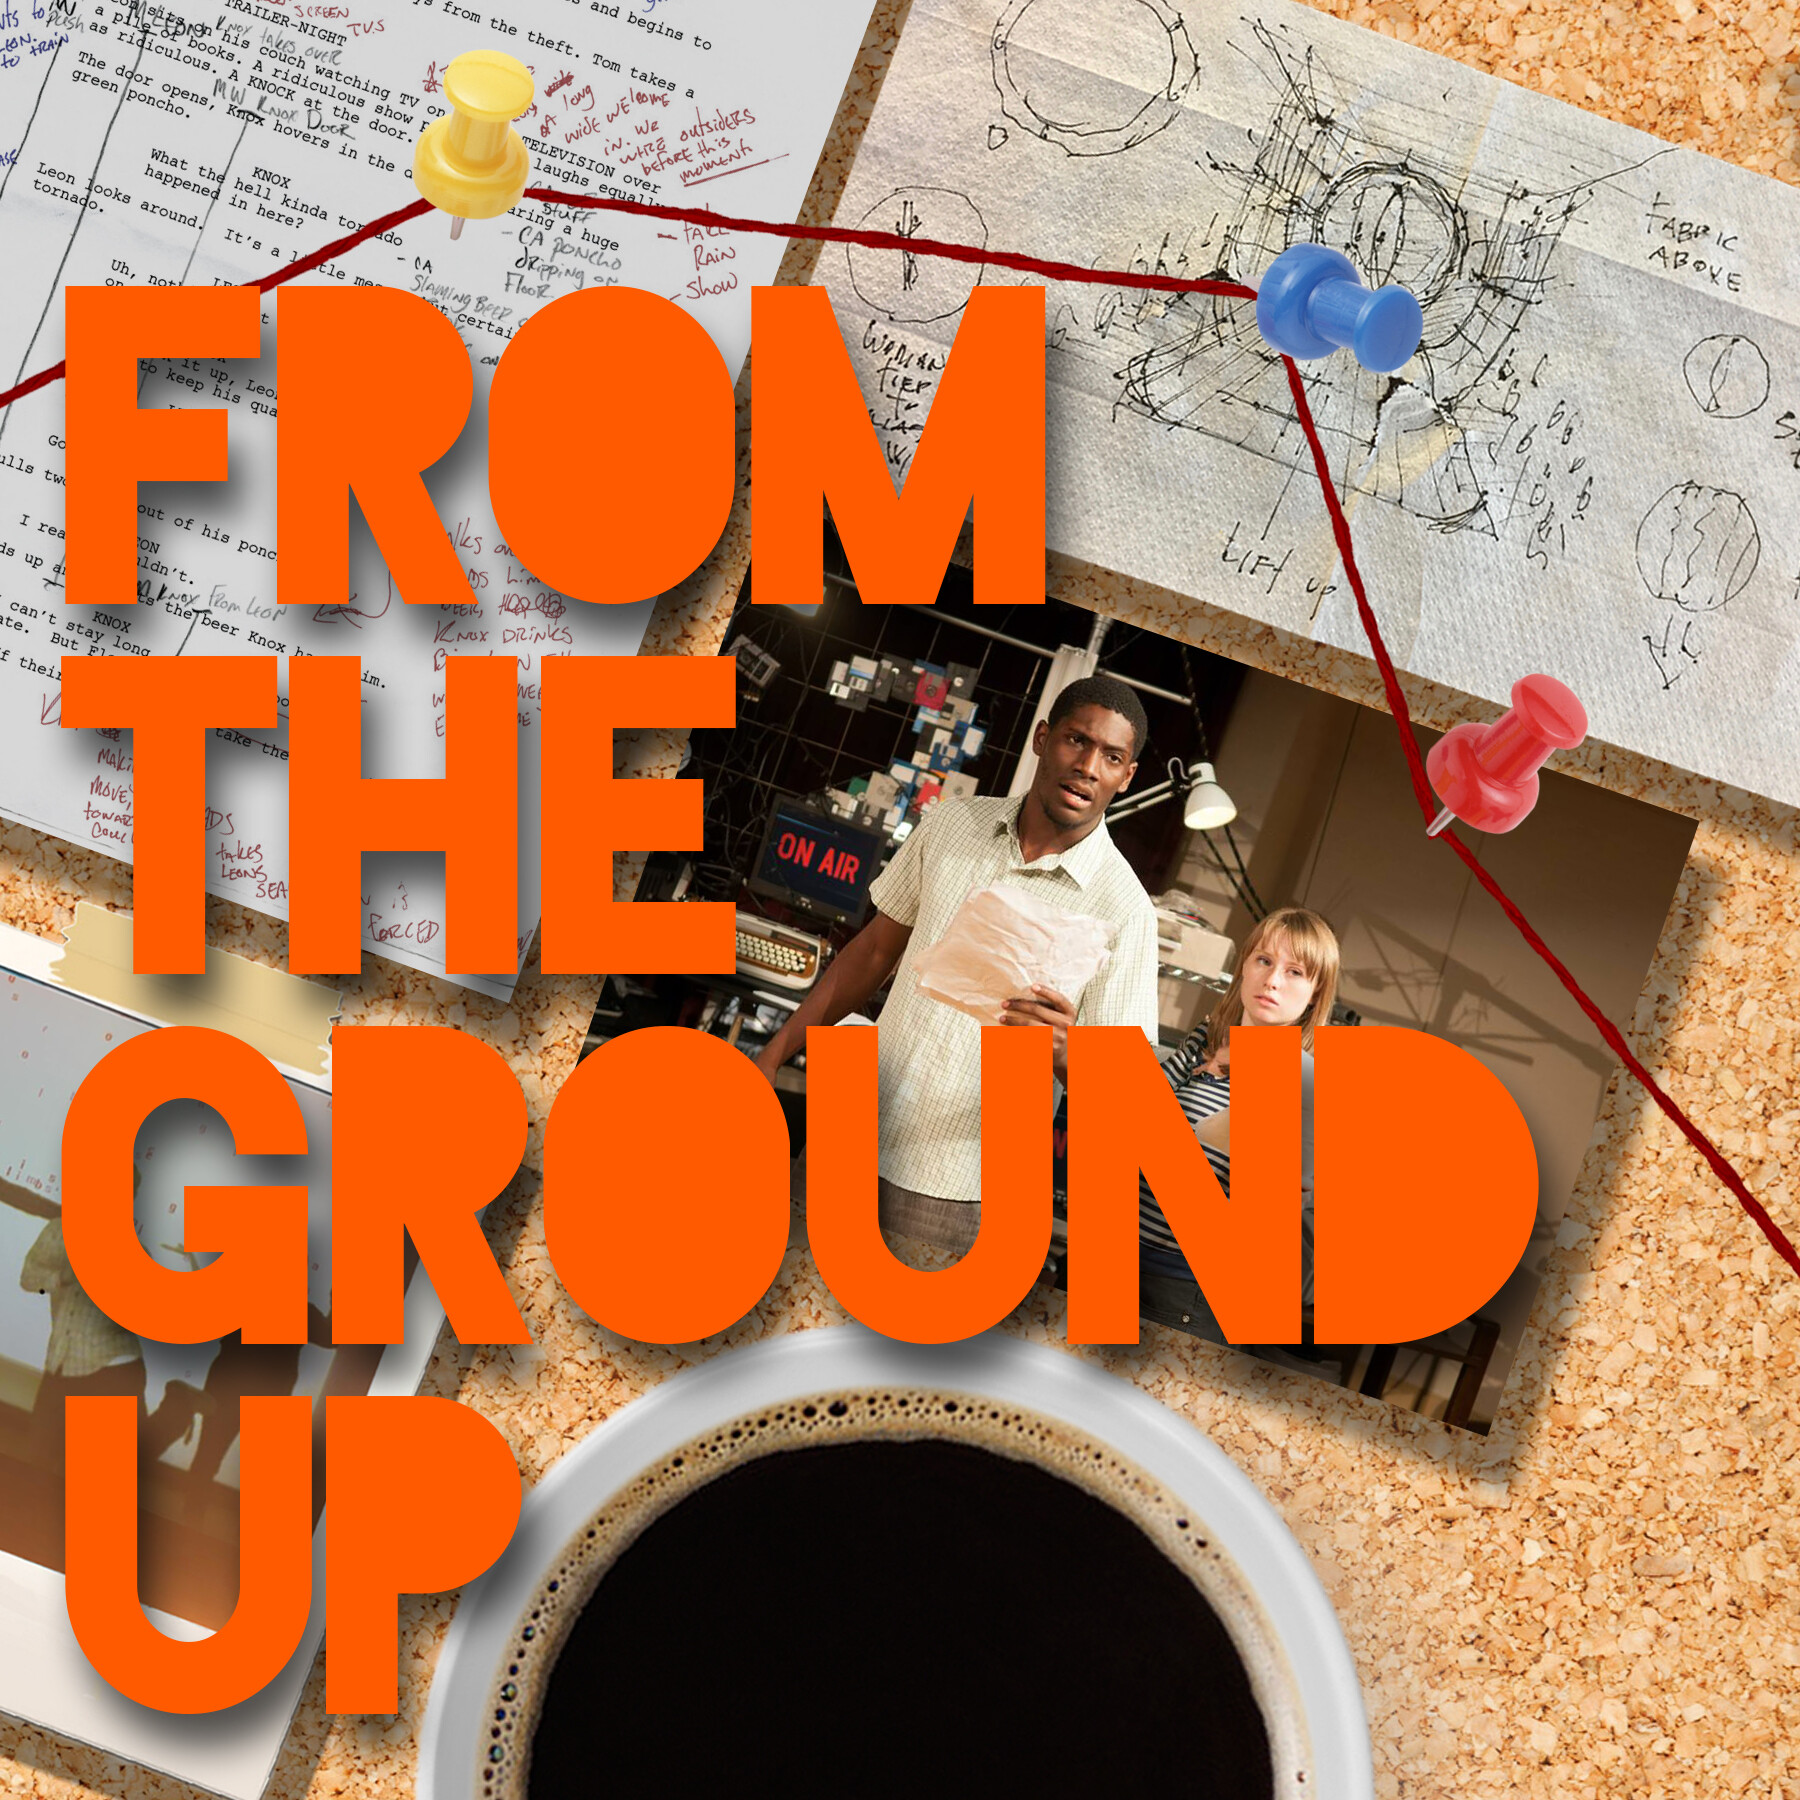 From the Ground Up logo